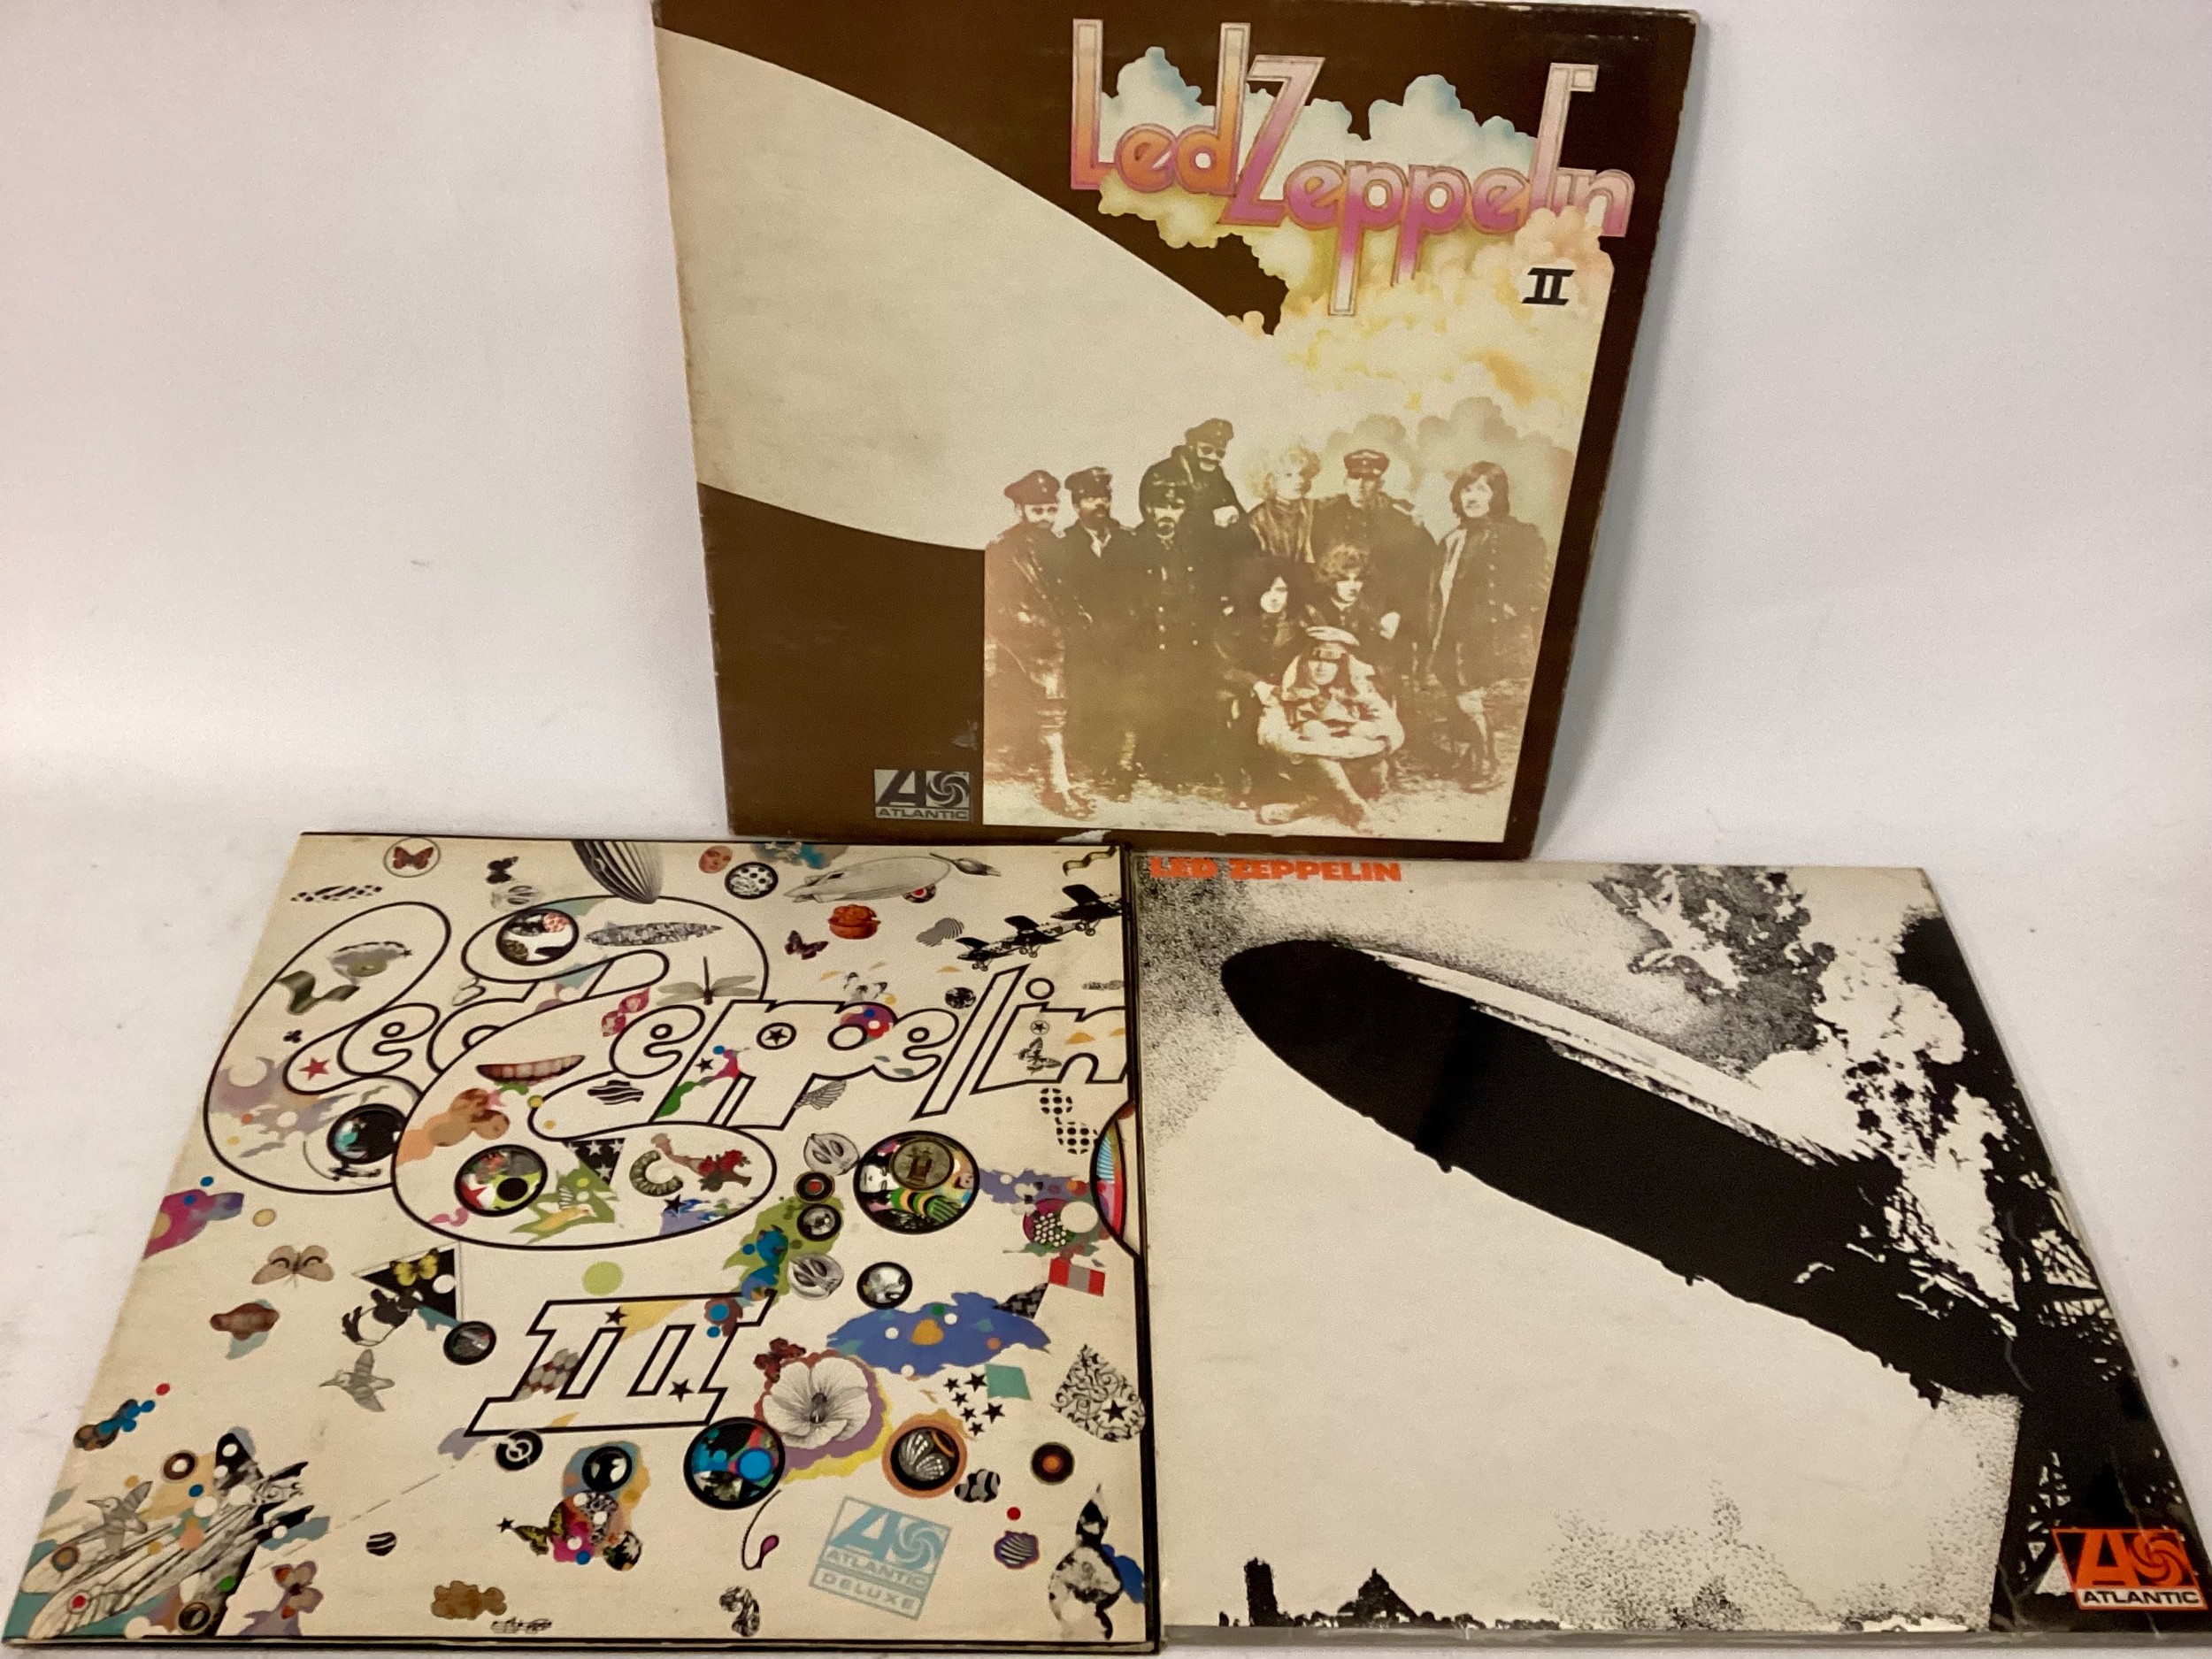 LED ZEPPELIN 1 / 2 & 3 PLUM LABEL VINYL ALBUMS. First we have a copy of their first album On